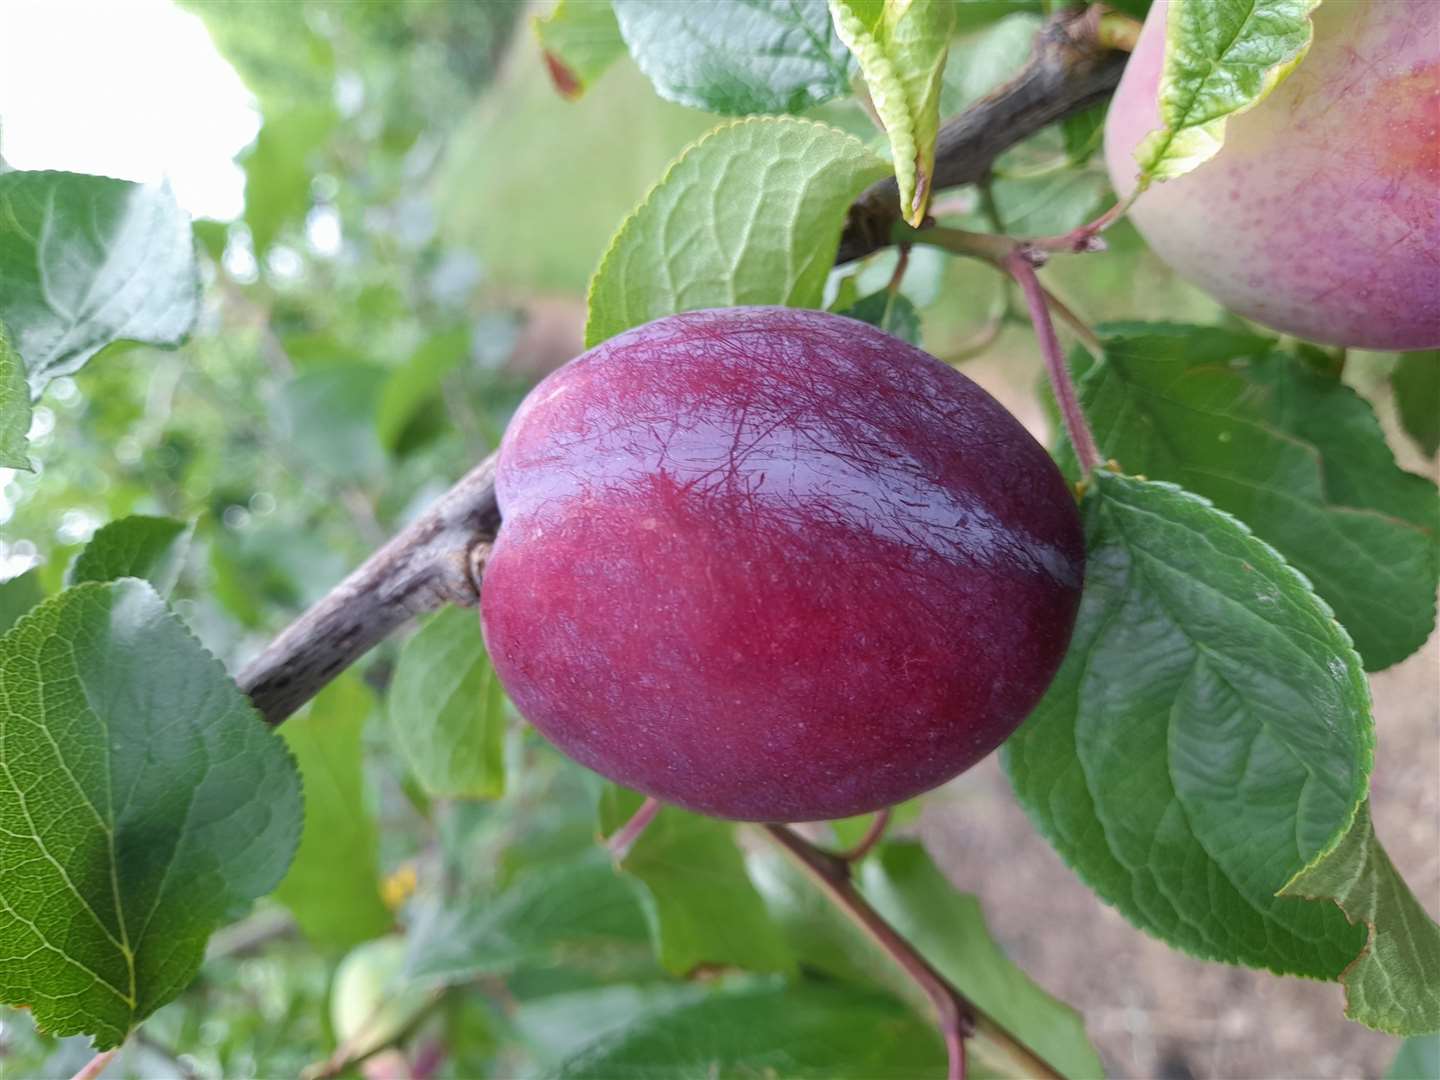 The Malling Elizabeth plum was unveiled publicly this week